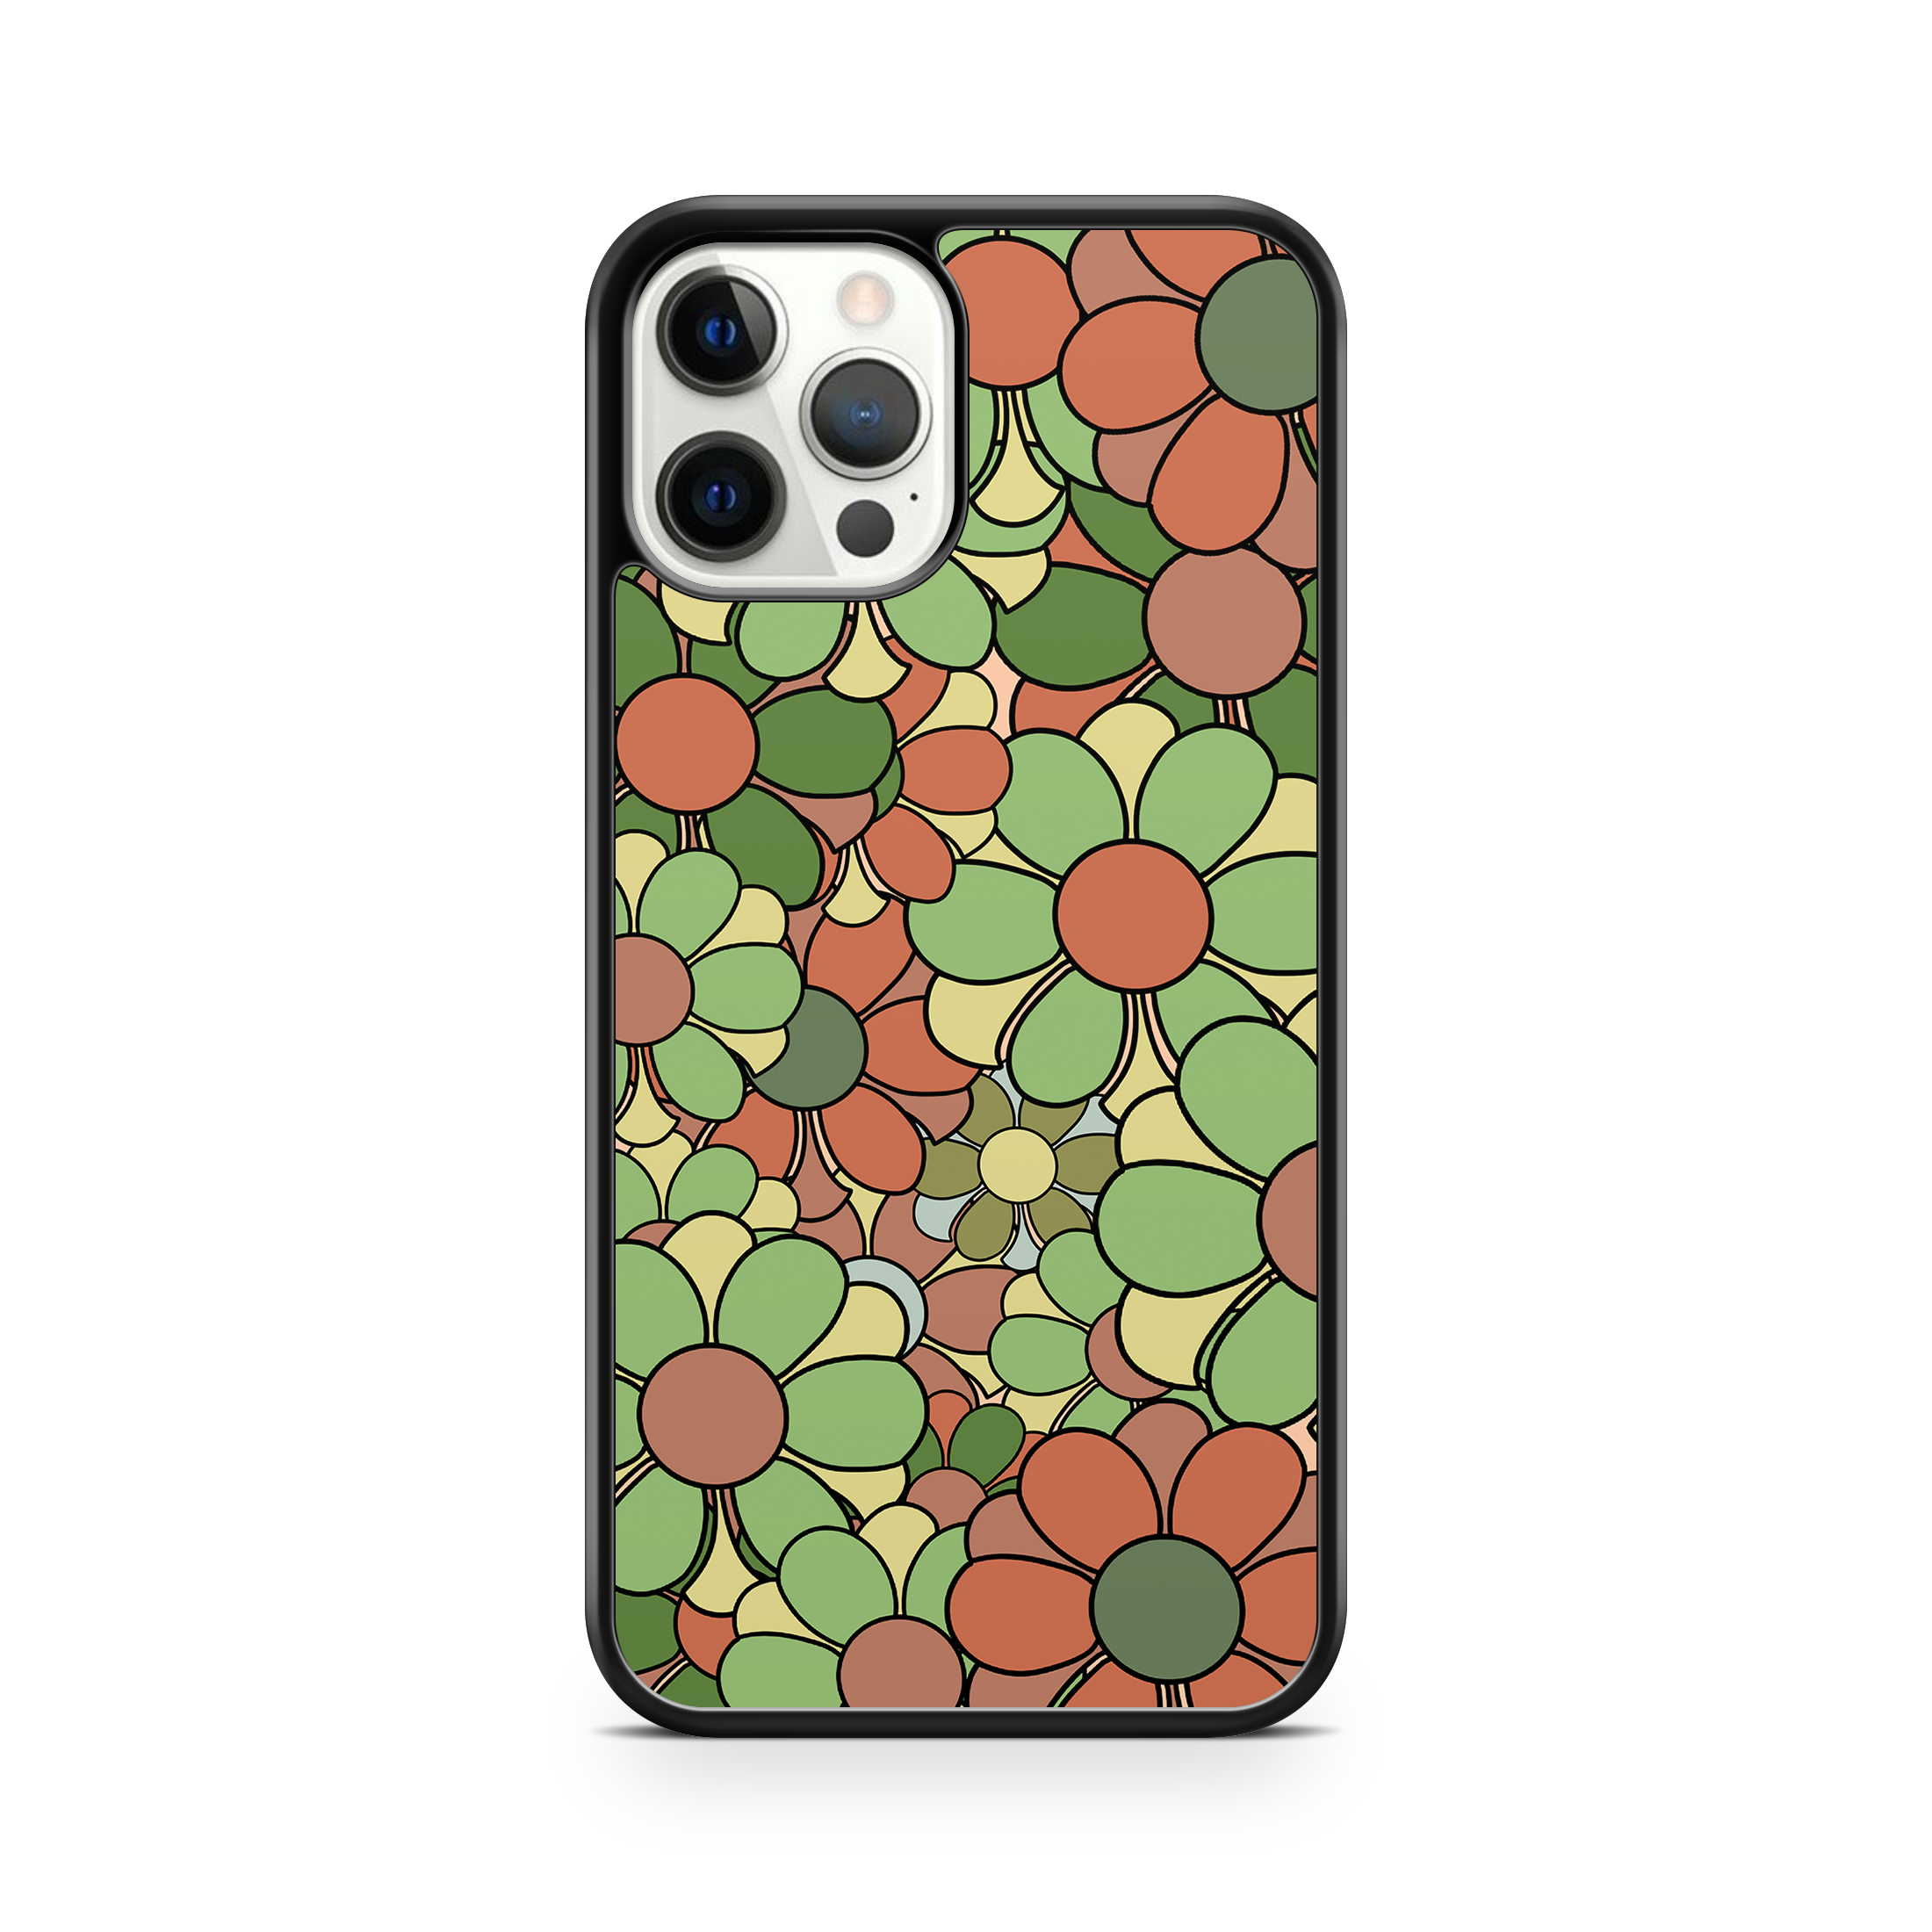 Vintage Autumn Abstract Fall Flower Patterned Phone Case For IPhone & Samsung - OnTheCase4U